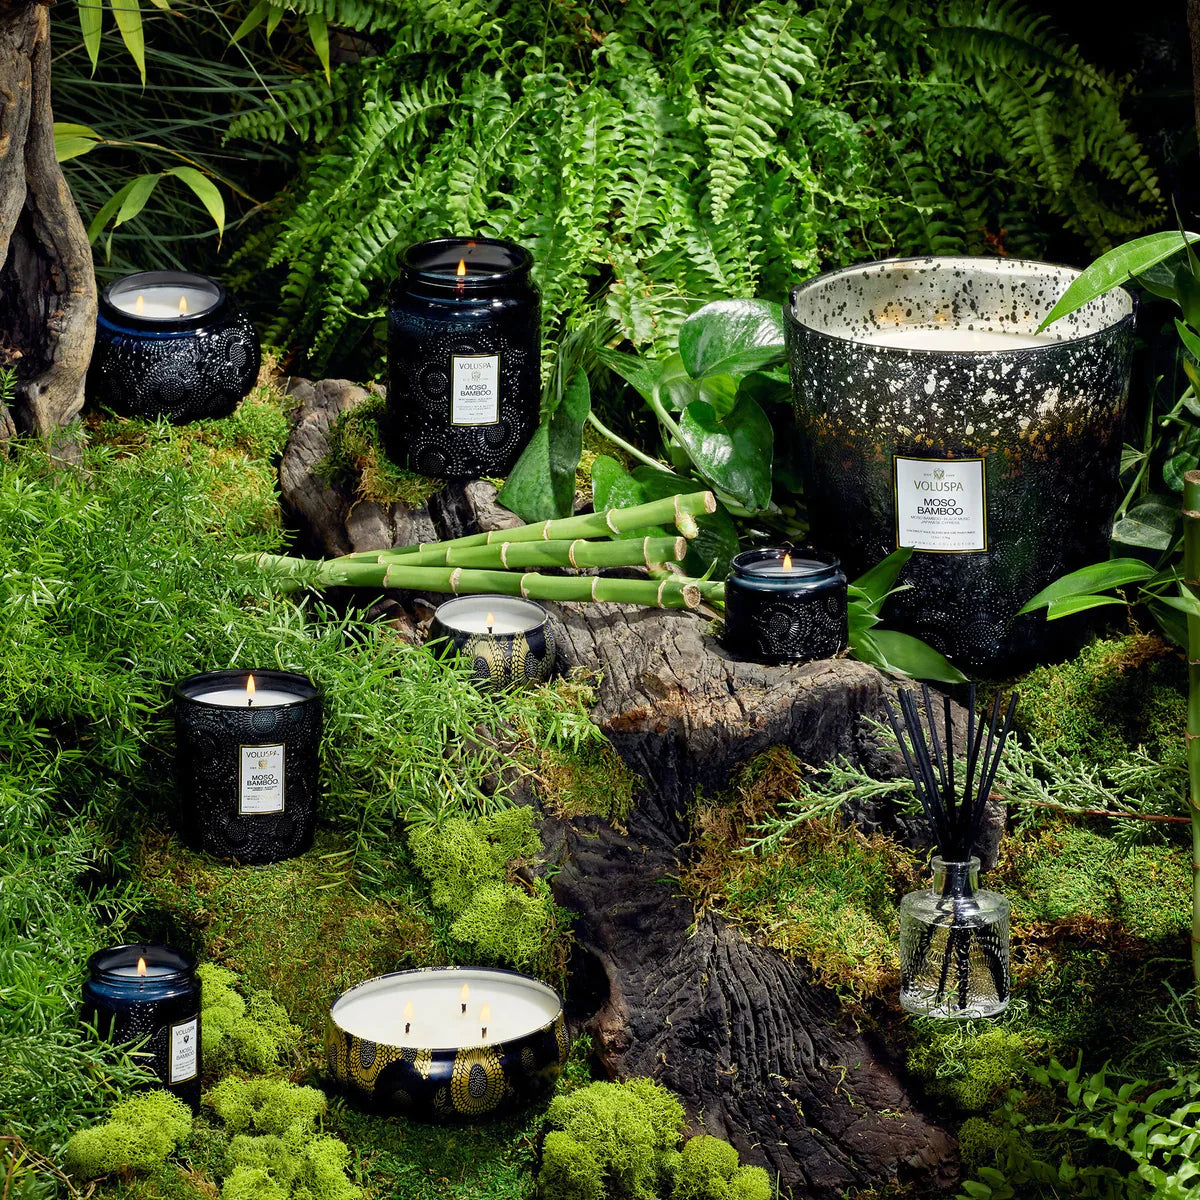 Moso Bamboo Candle collection in nature scene